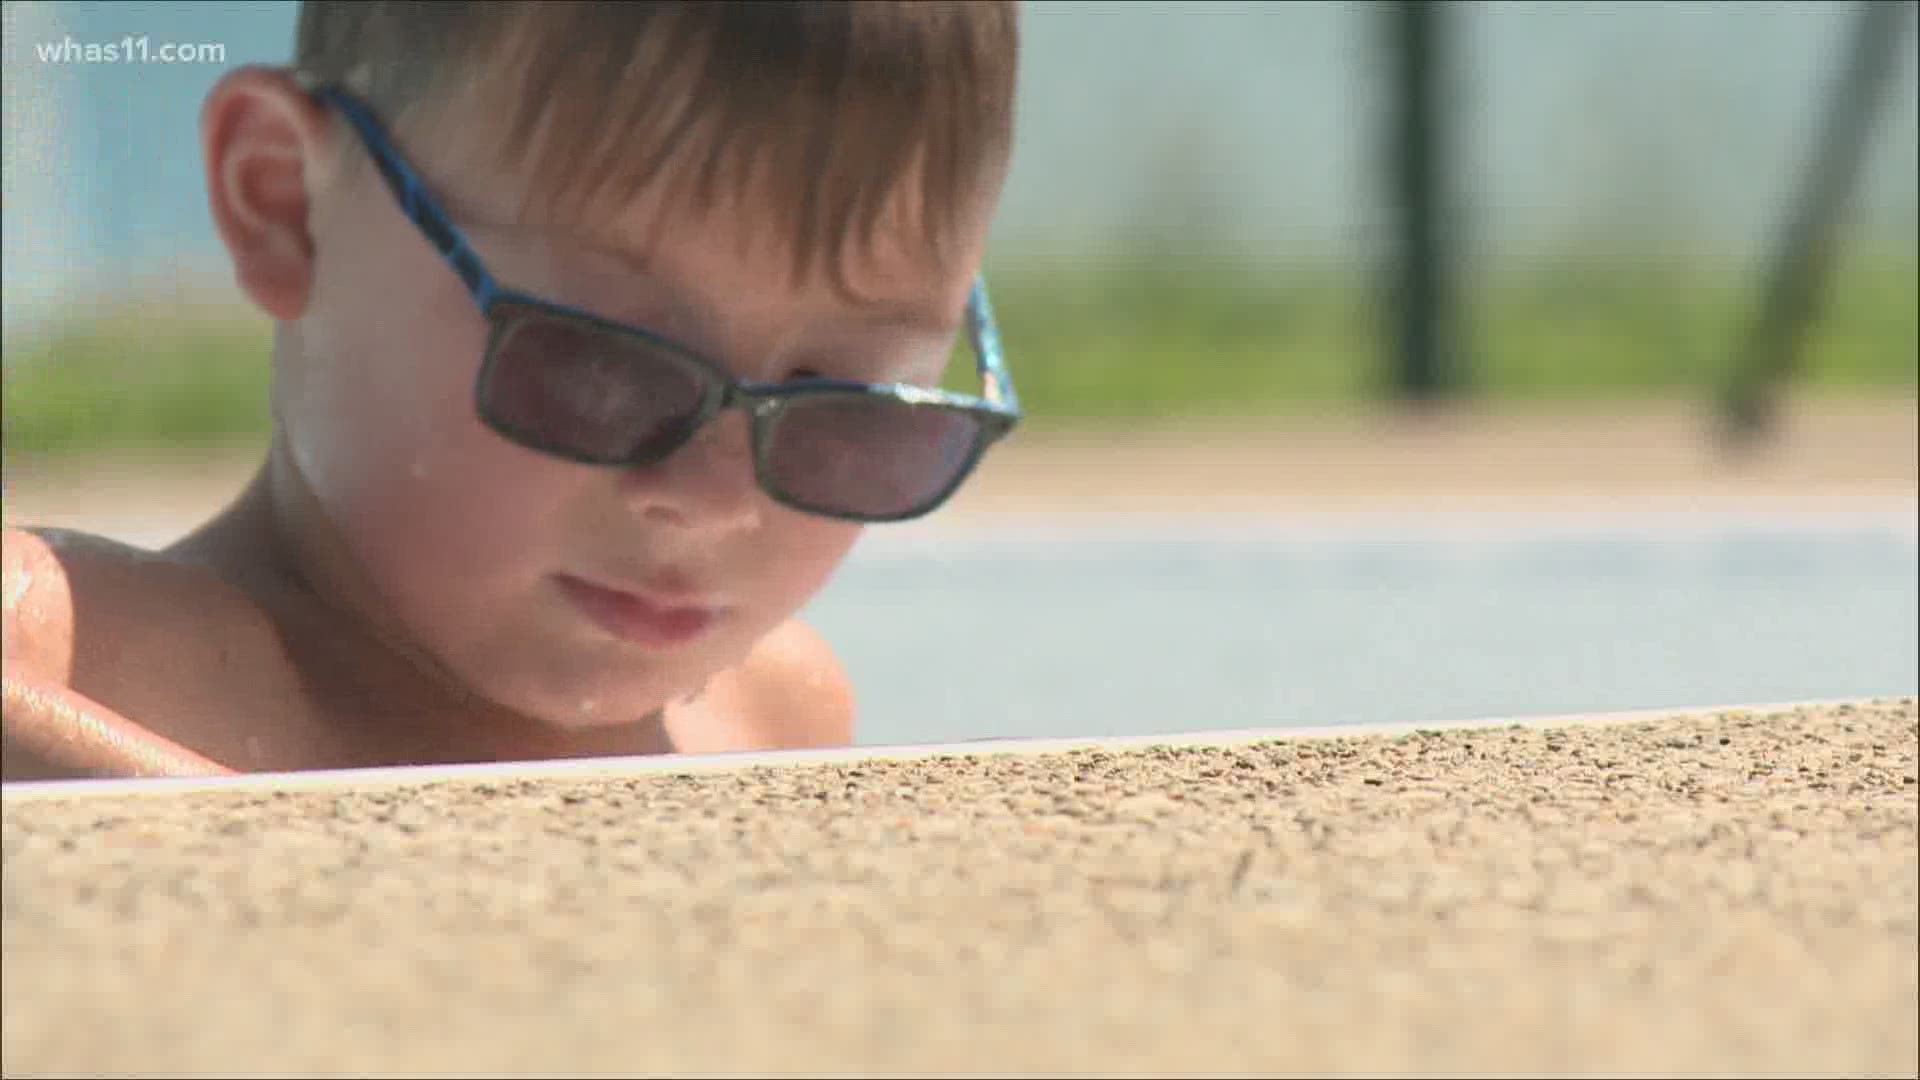 Tuesday was opening day for Louisville's Fairdale pool as the city begins to open some public pools after COVID-19 delays.